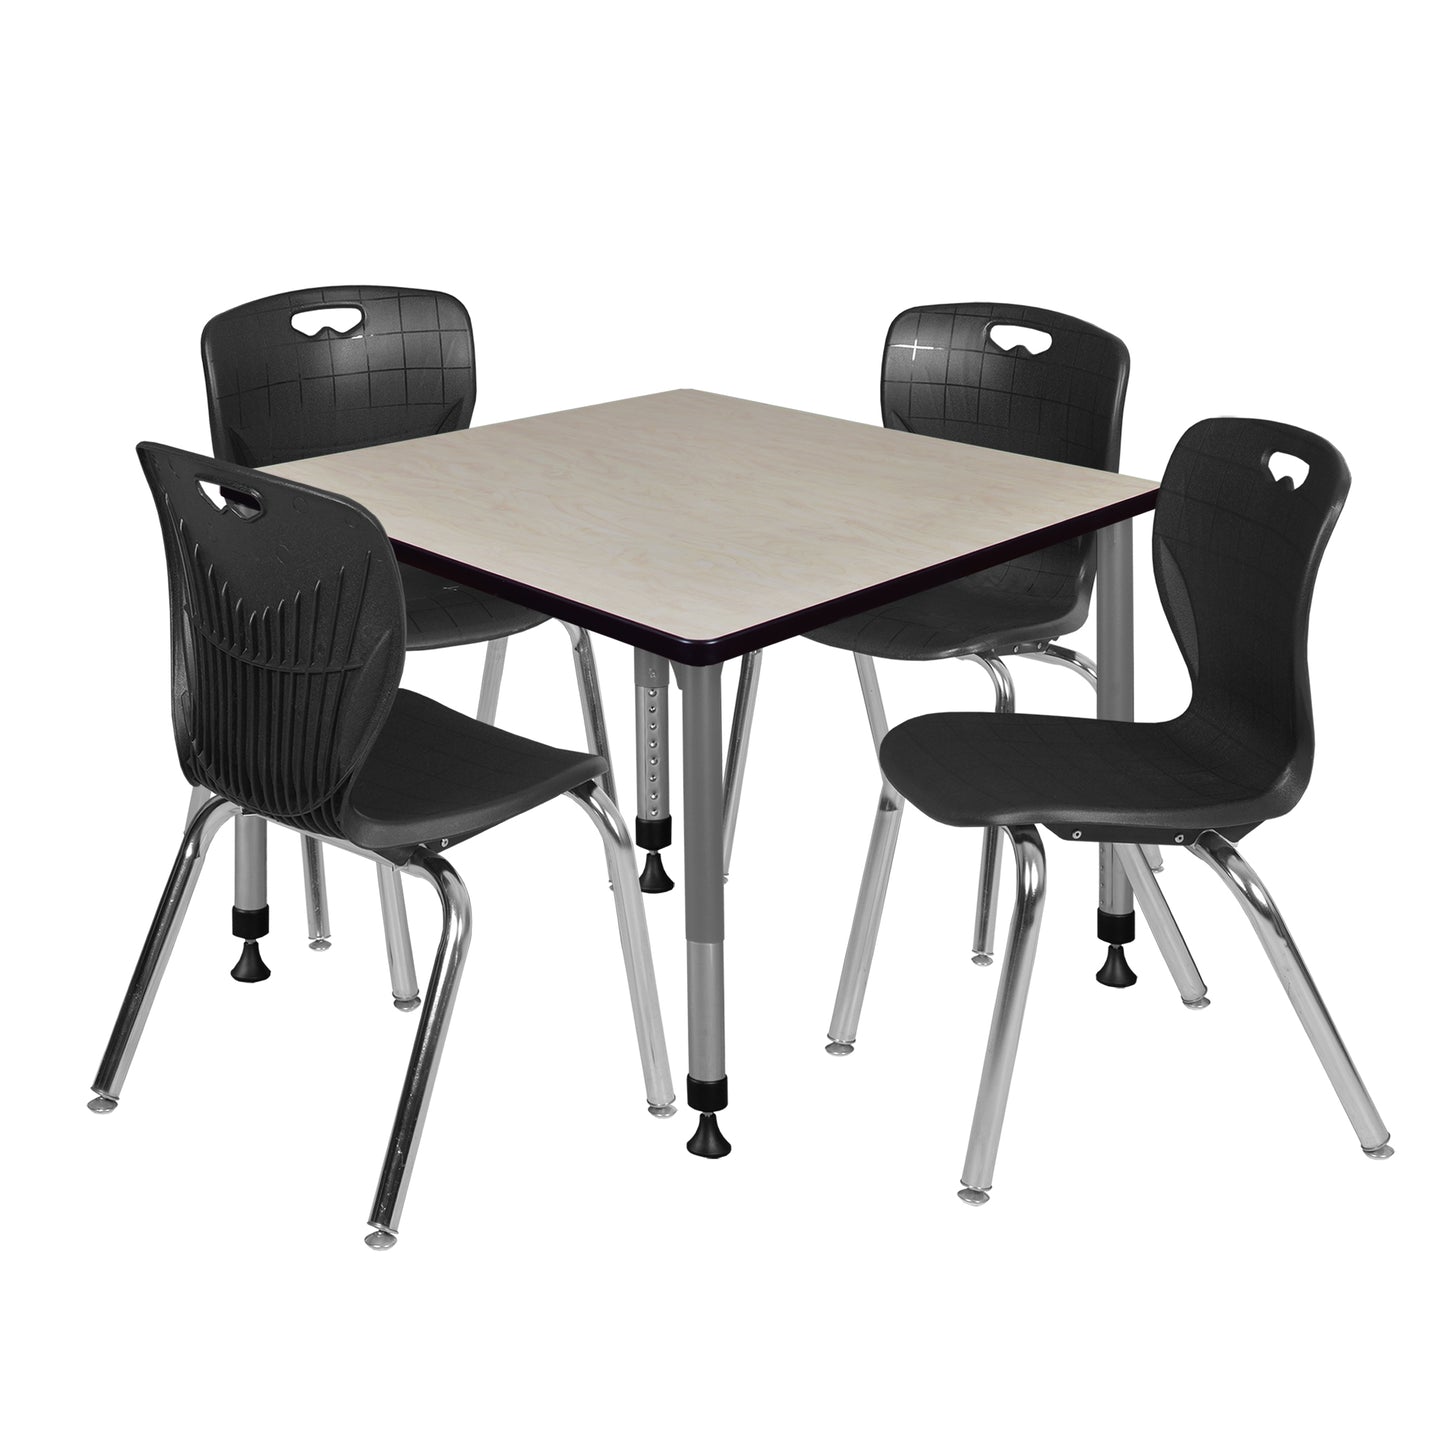 Regency Kee 42 in. Square Adjustable Classroom Table & 4 Andy 18 in. Stack Chairs